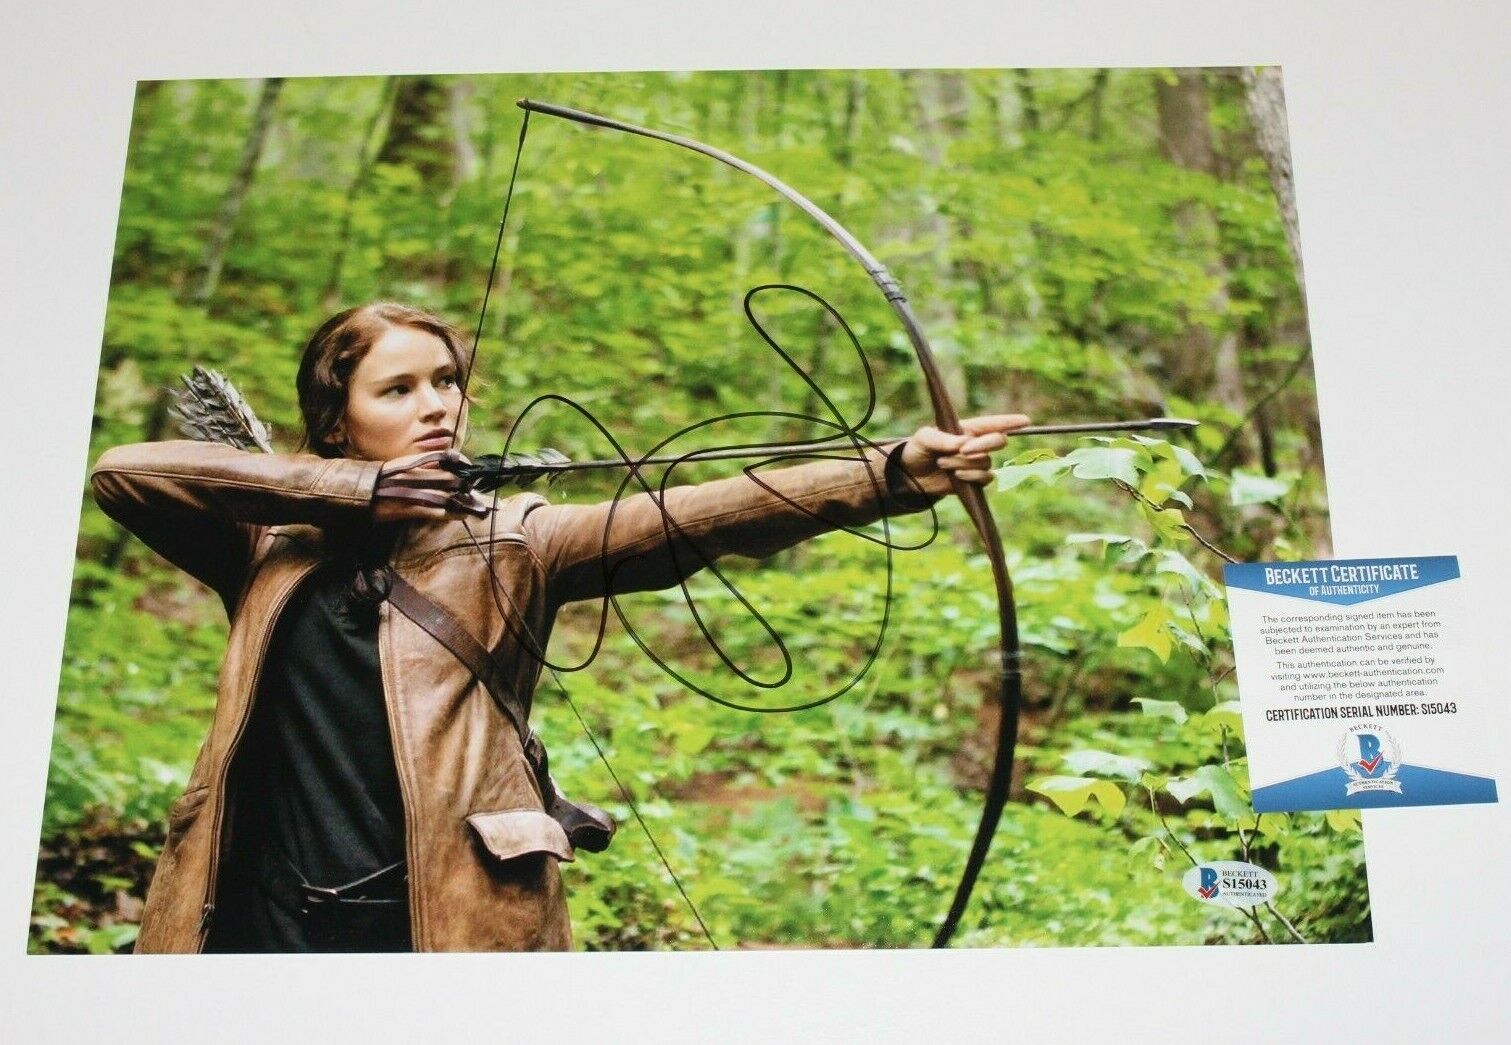 SEXY JENNIFER LAWRENCE SIGNED 'THE HUNGER GAMES' 11x14 Photo Poster painting BECKETT COA KATNISS